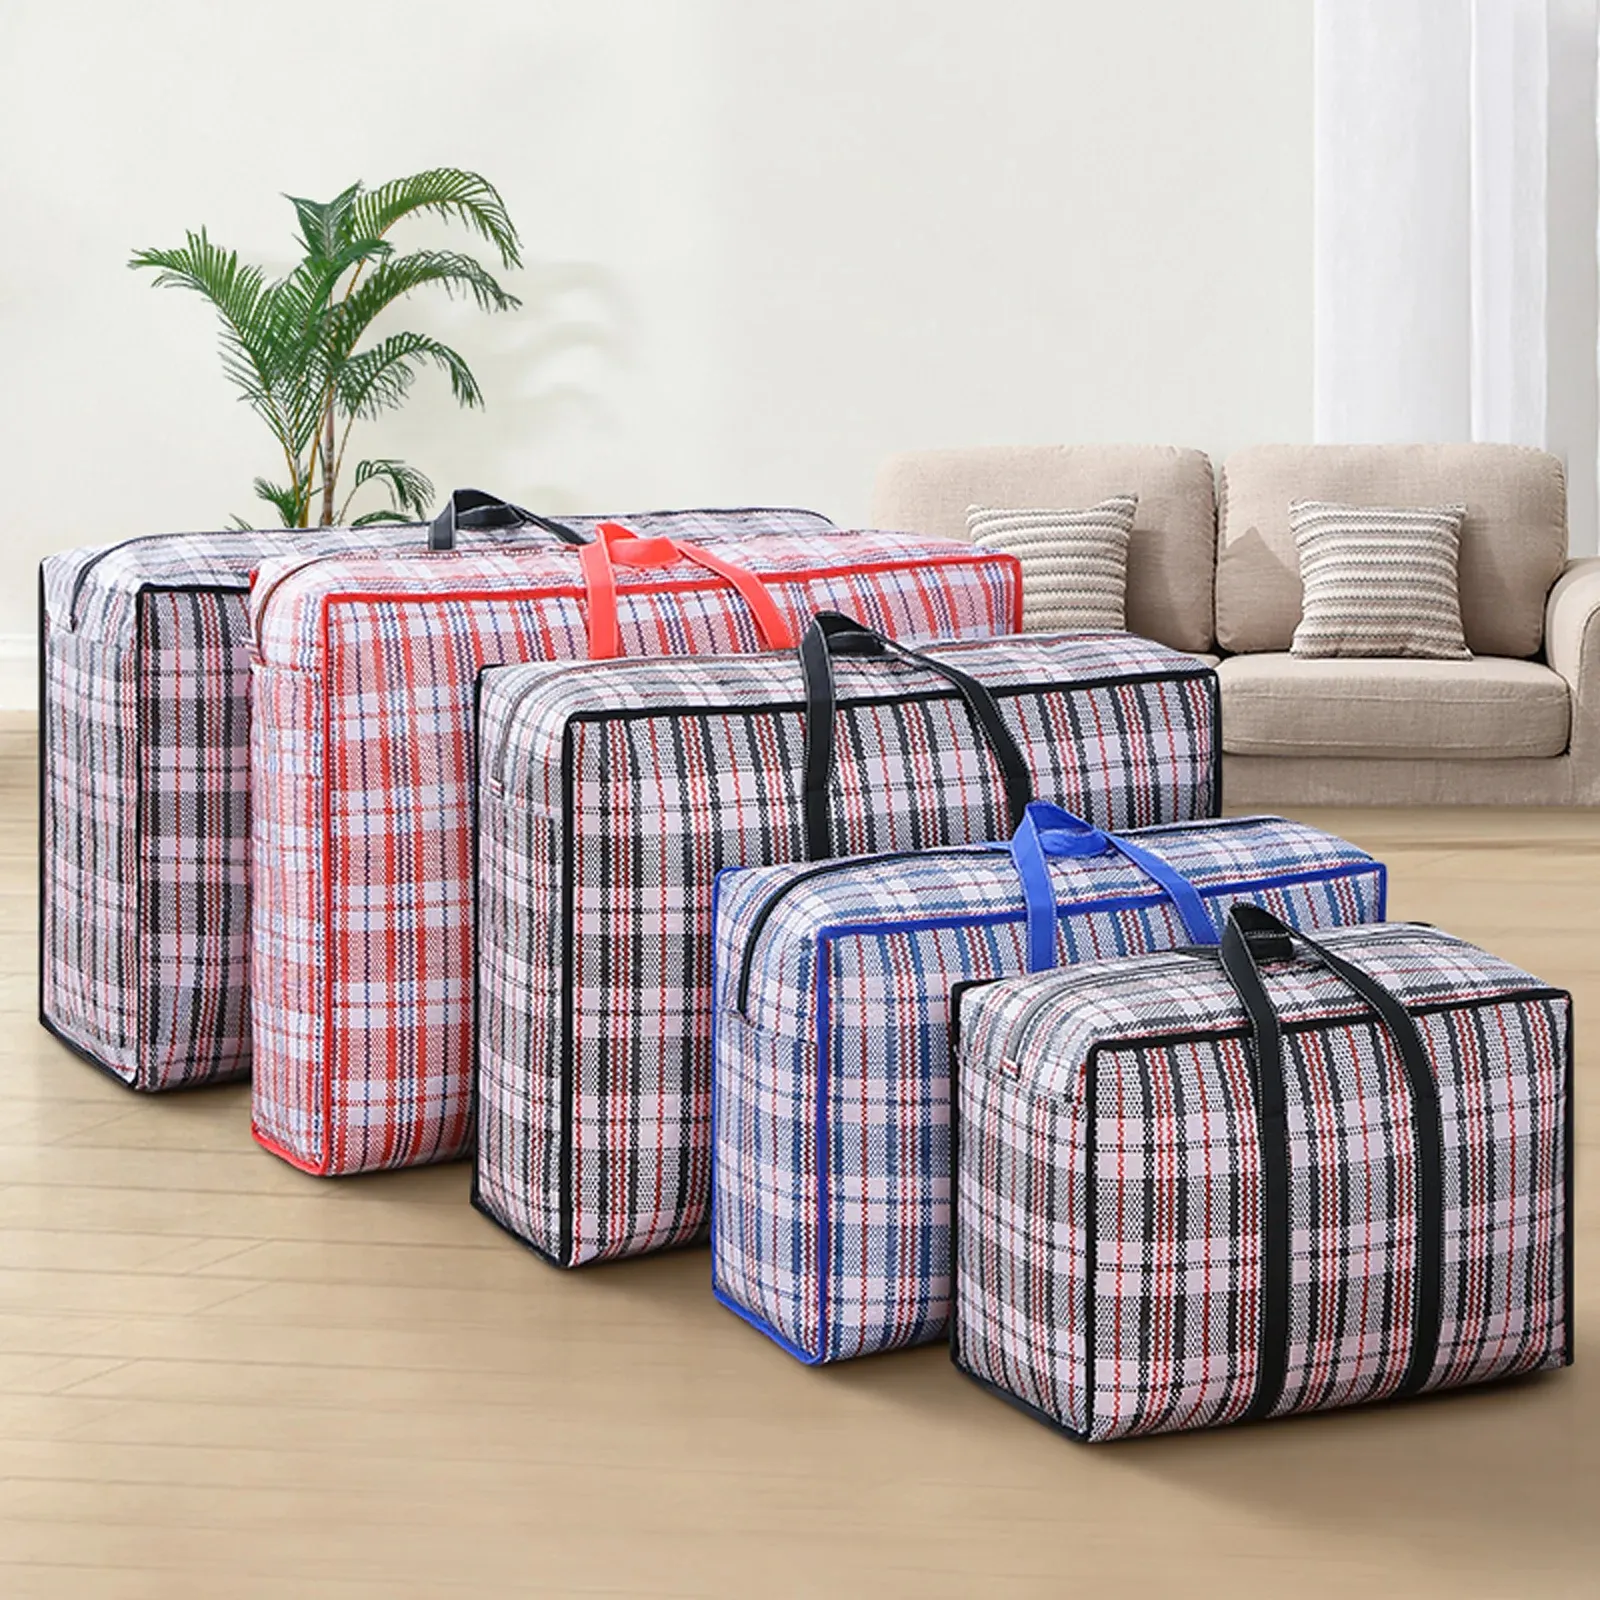 Multifunctional Thickened Woven Bag Large Capacity Waterproof Quilt Portable Storage Travel Luggage Moving Bags with Handle